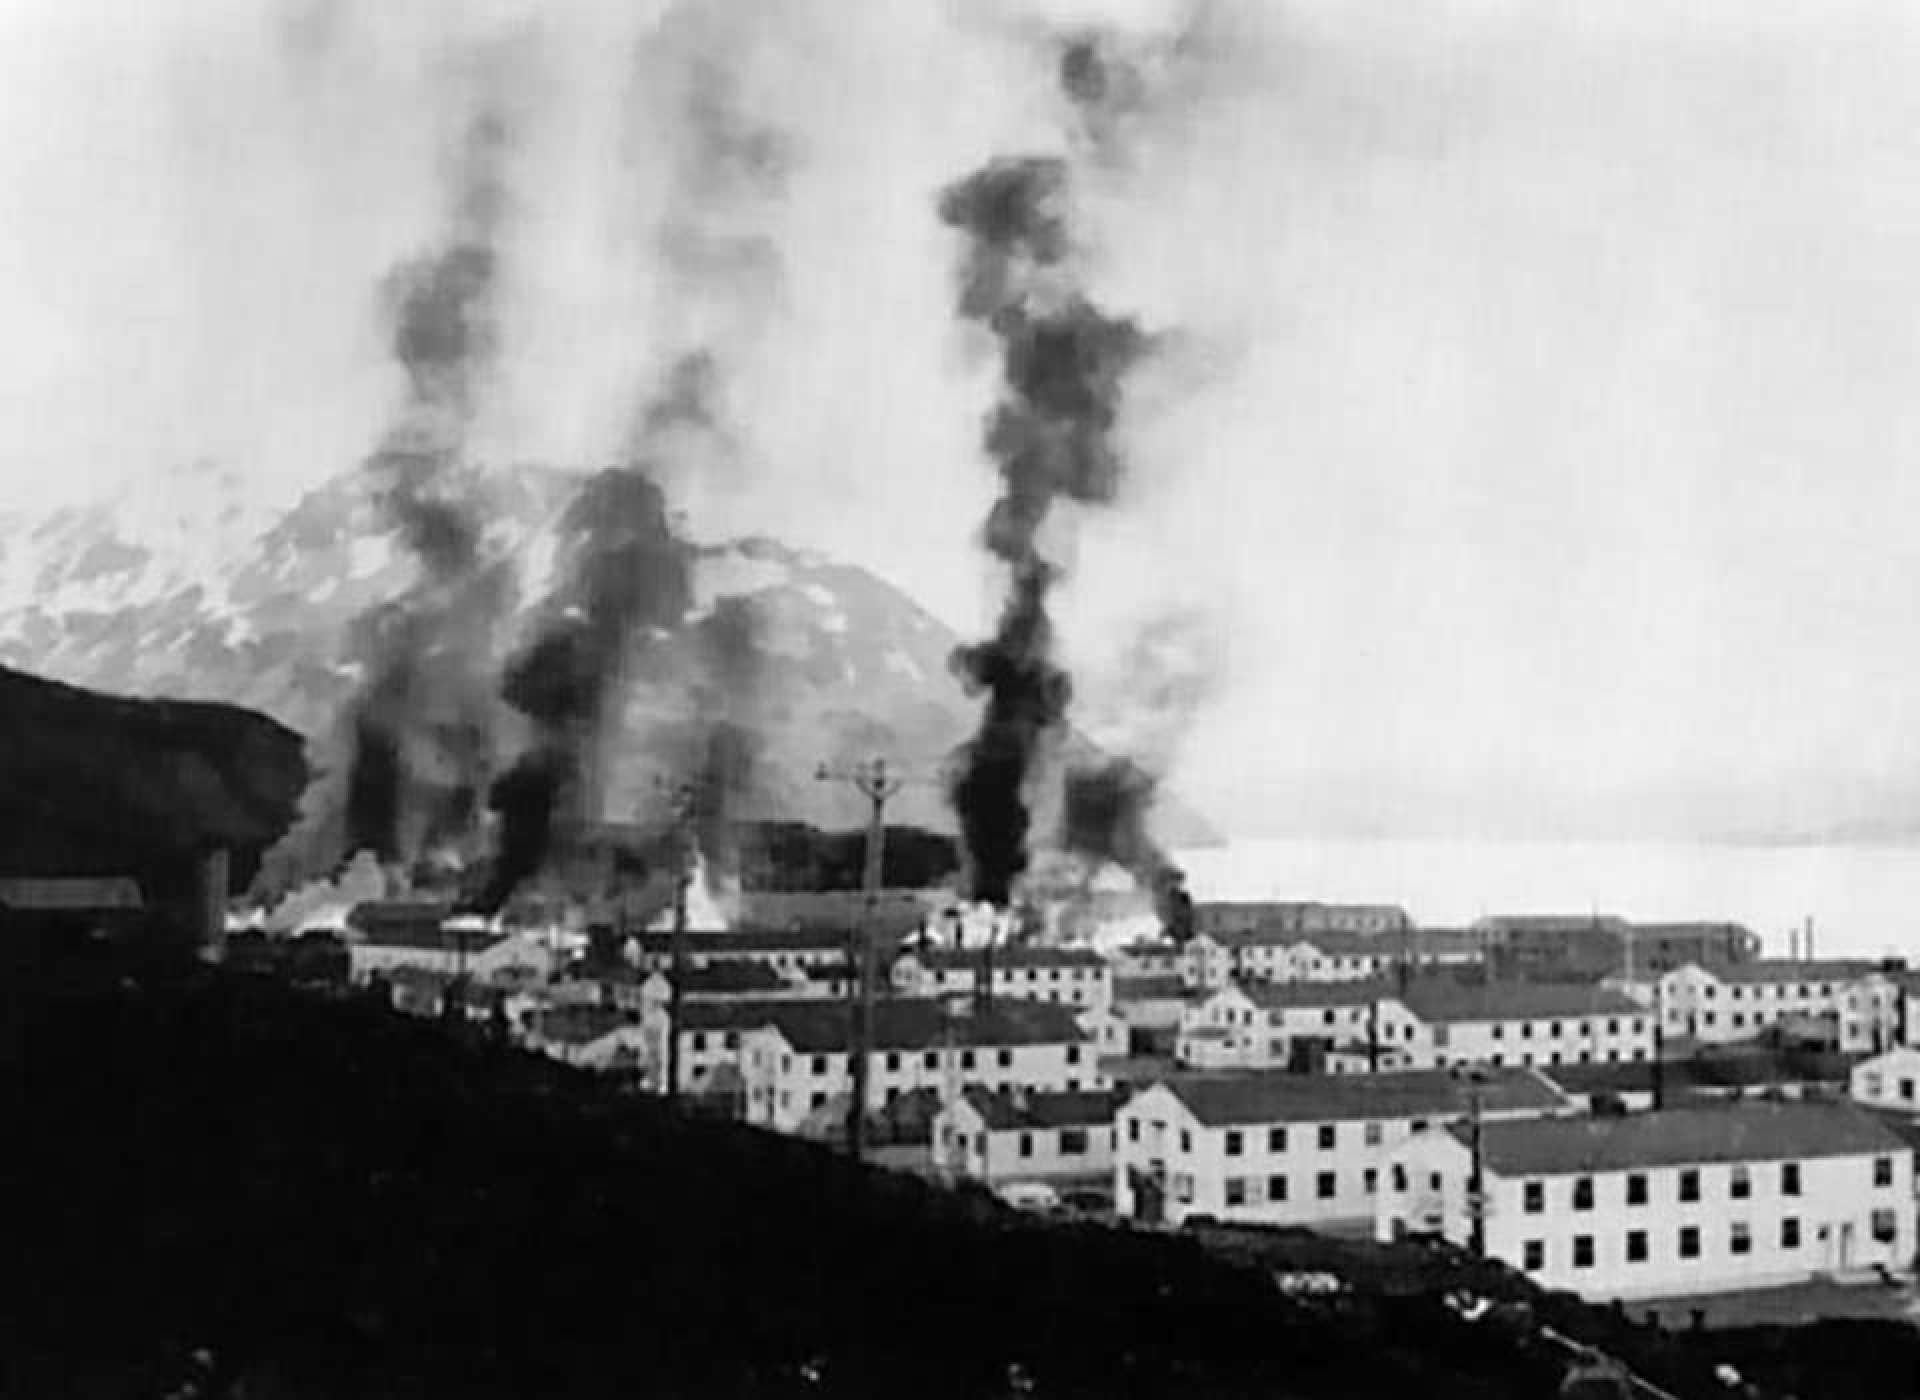 Barracks buildings at For Mears burn following the Japanese attack on June 3, 1942. Courtesy of the National Archives and Records Administration.